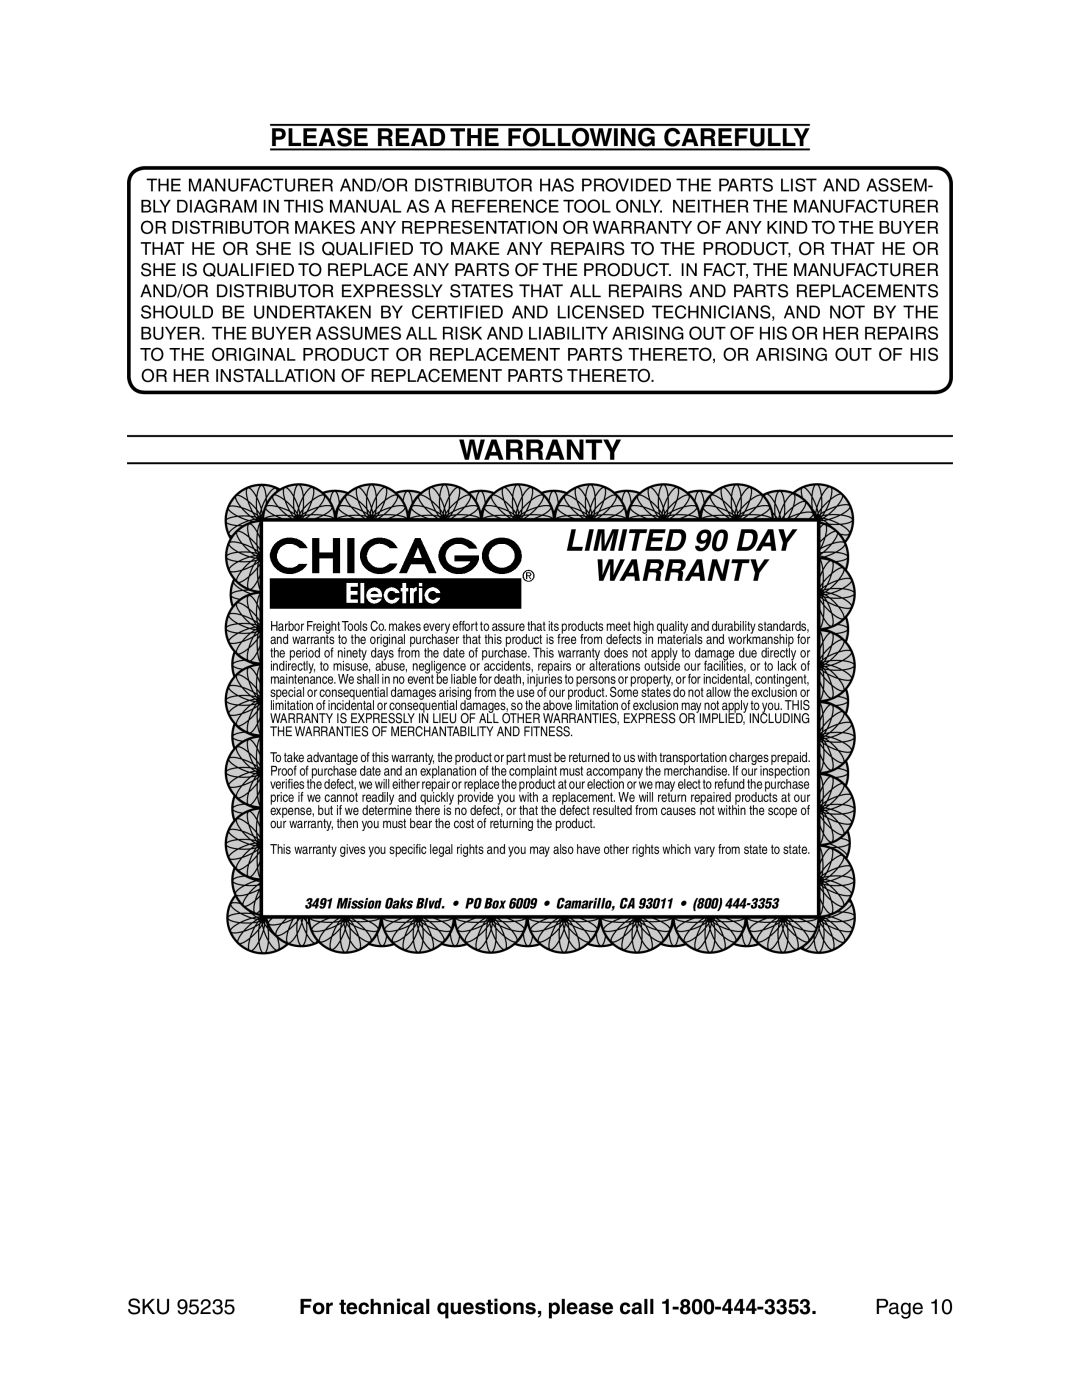 Chicago Electric 95235 manual Warranty, Please Read The Following Carefully, Limited 90 Day warranty, Page 